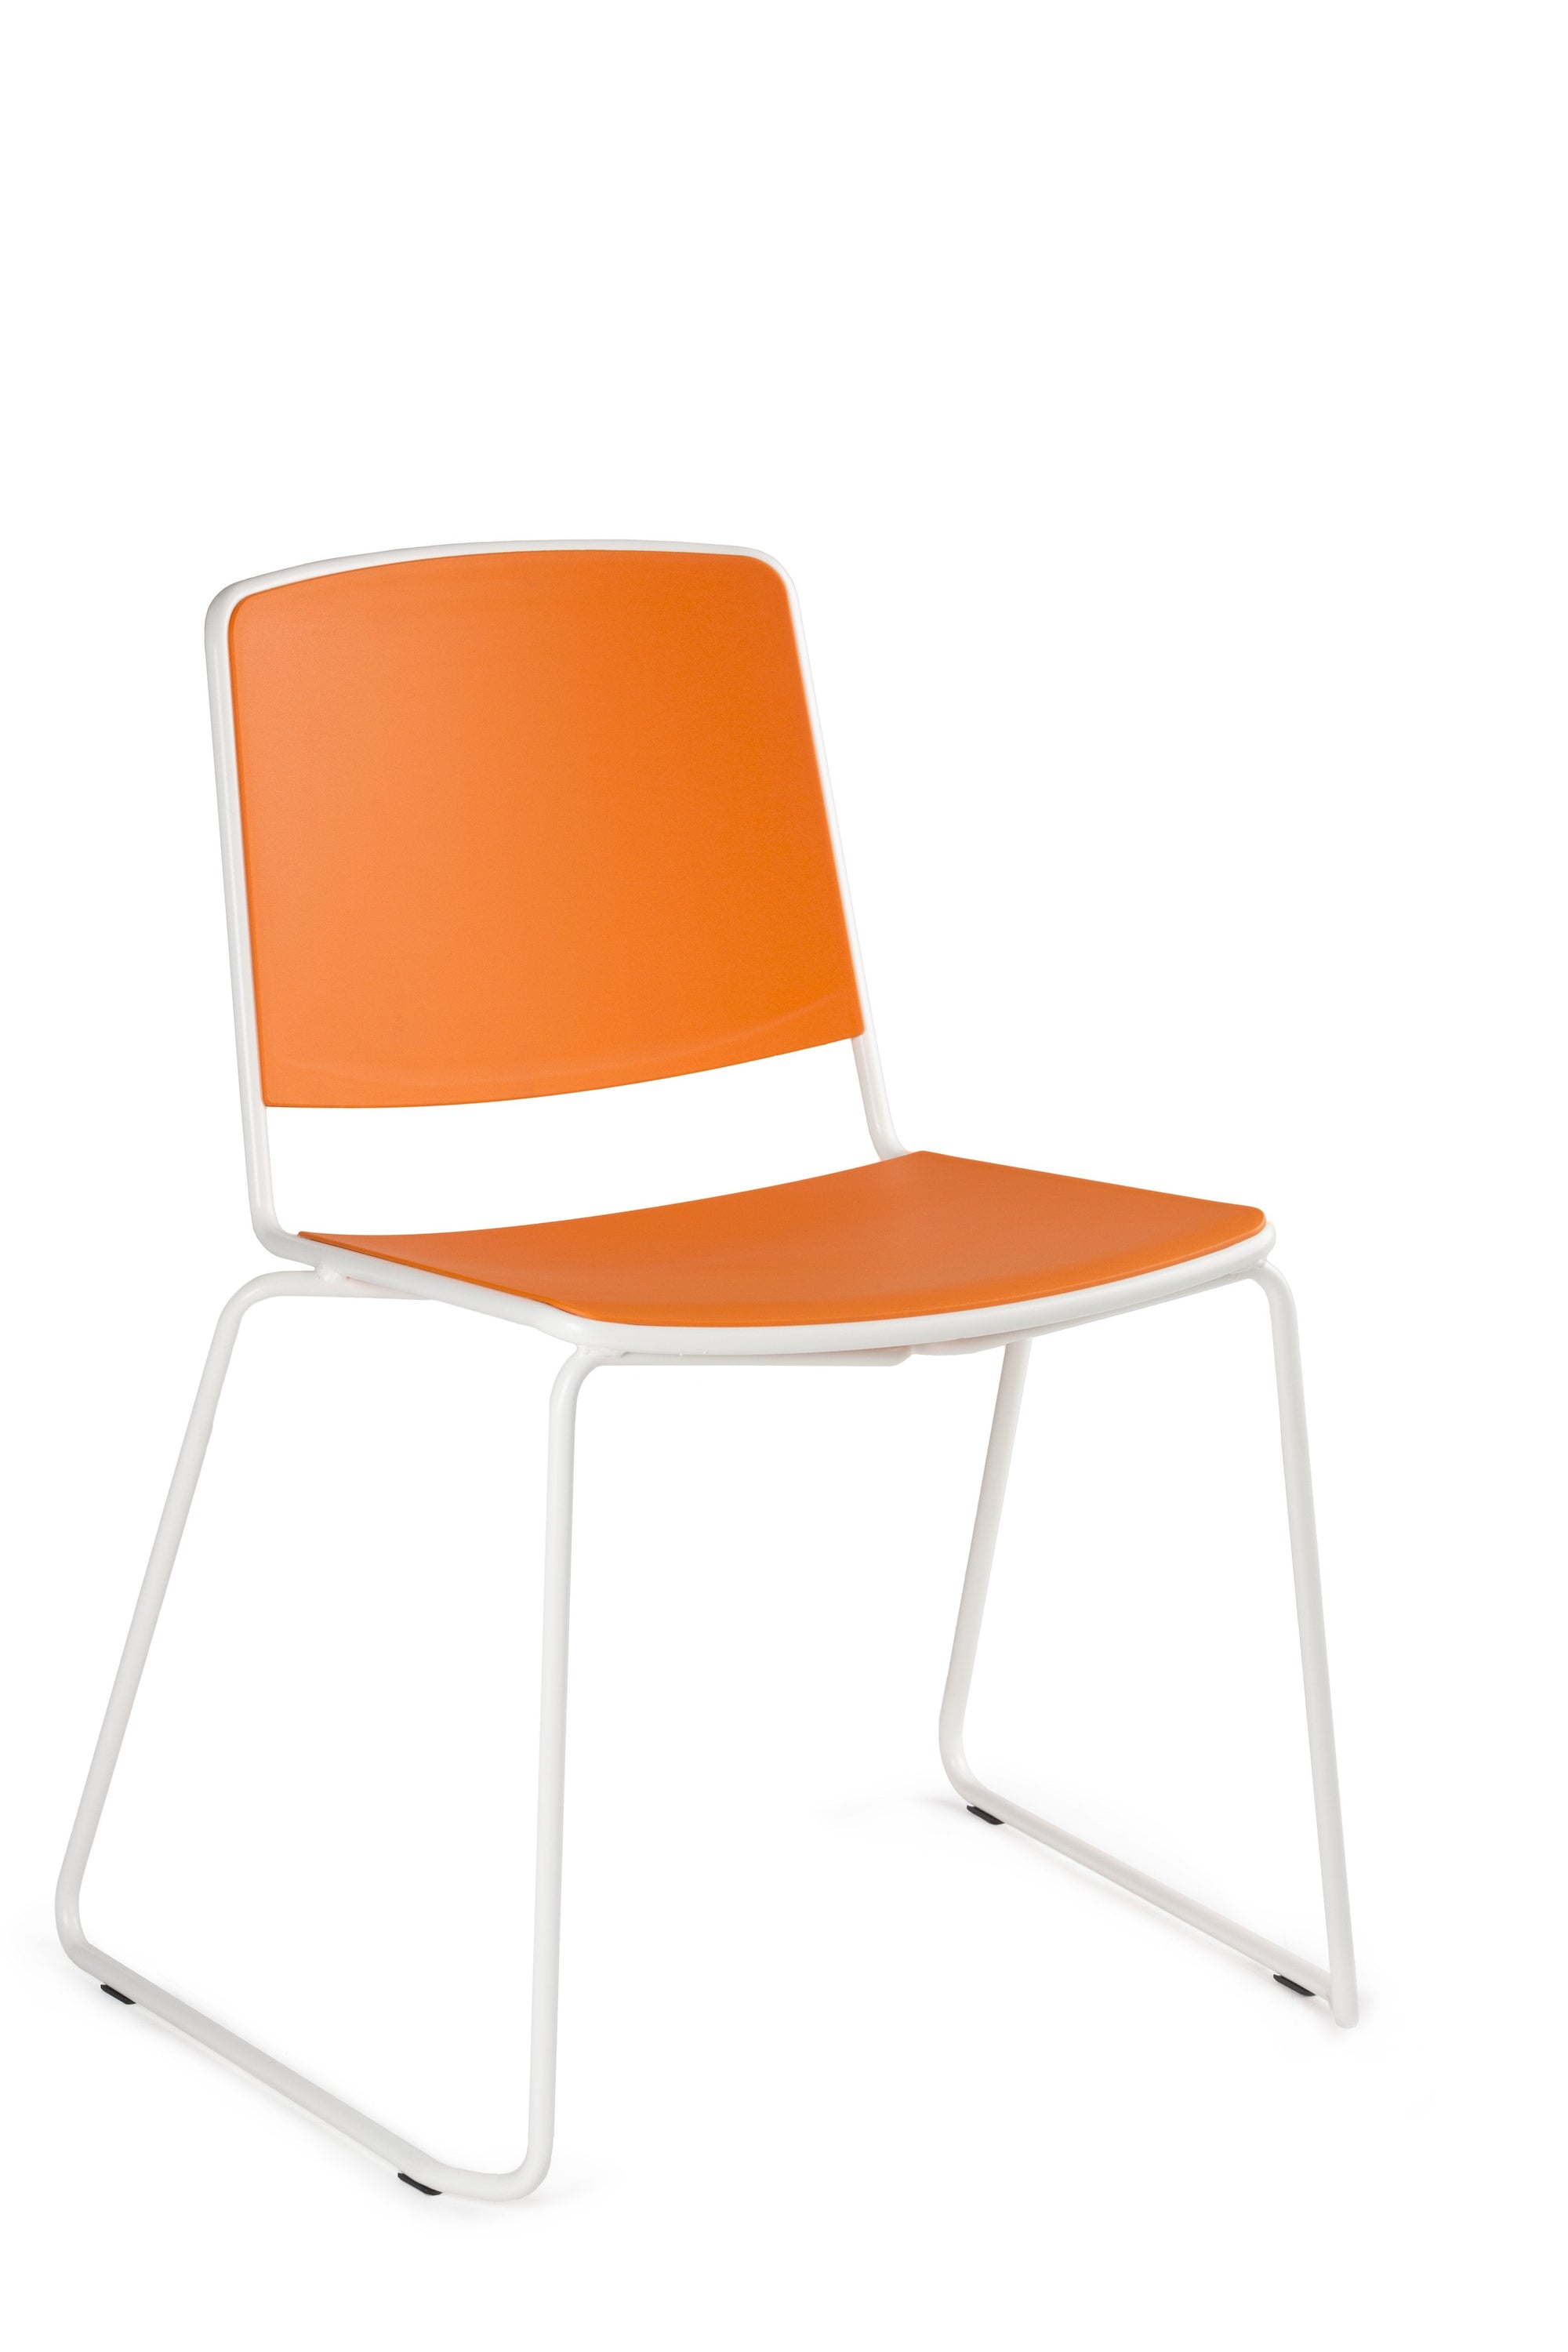 Vea 5100 Side Chair c/w Sled Legs-Mara-Contract Furniture Store